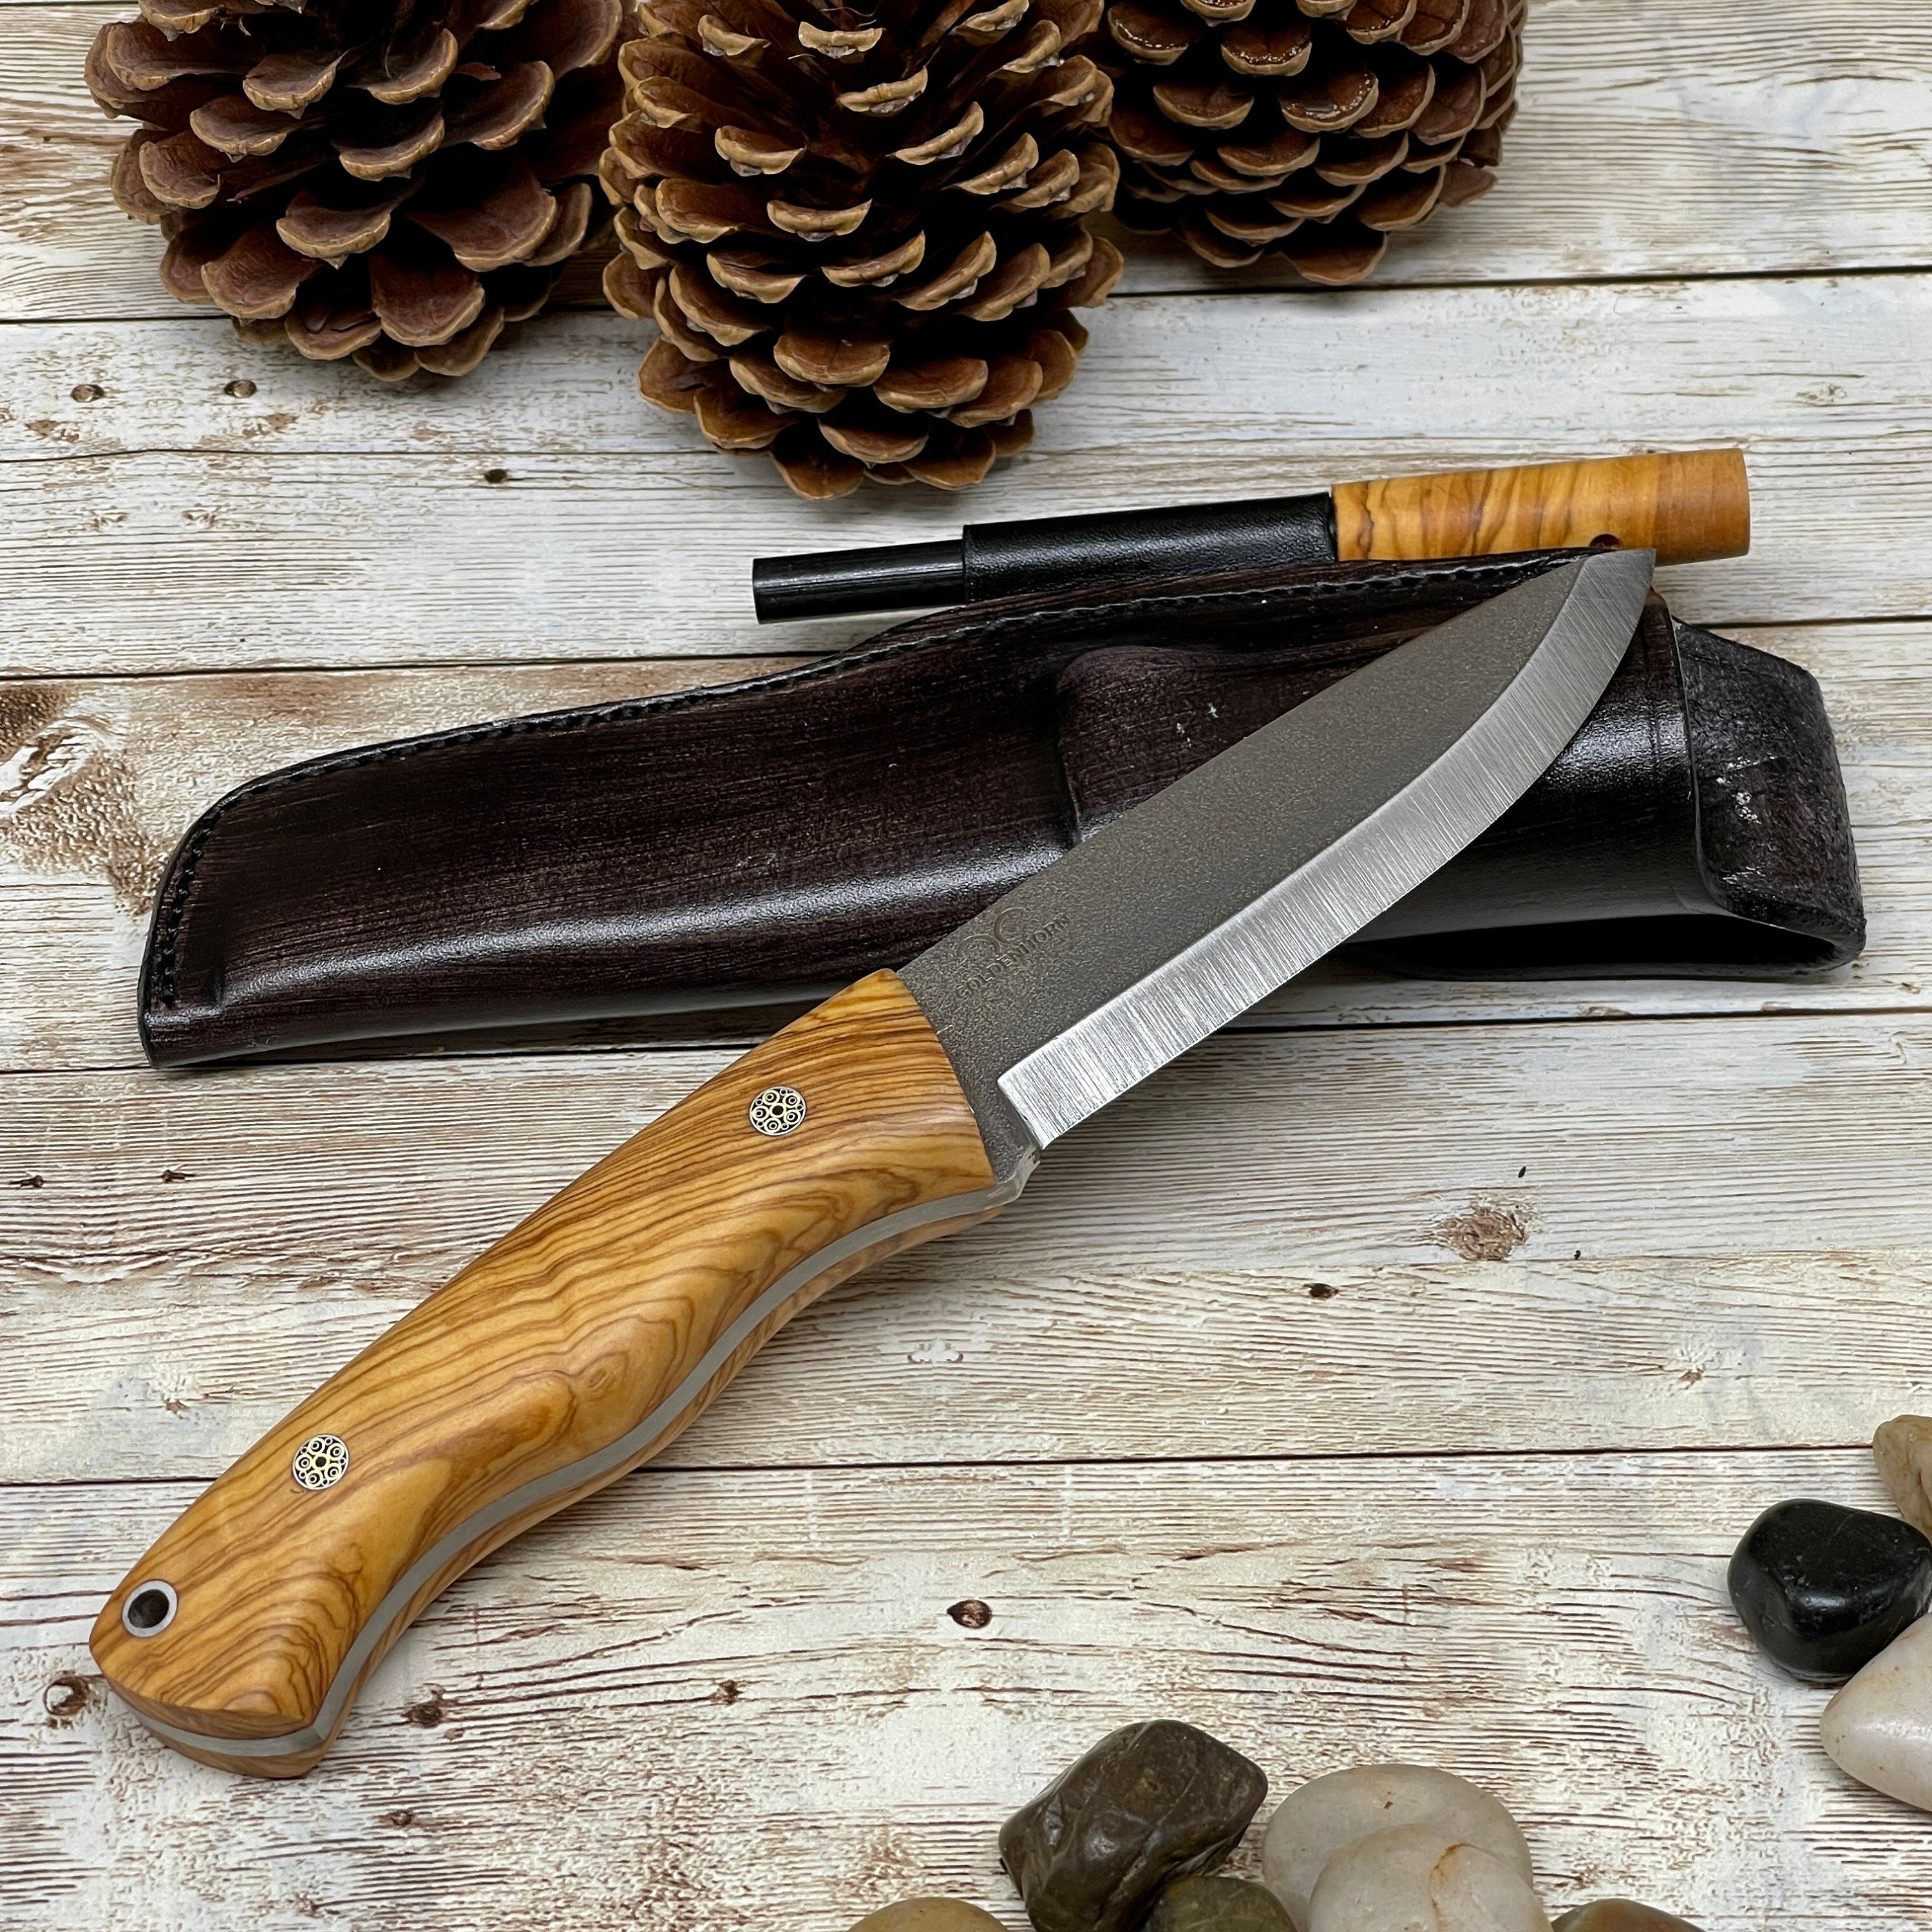 Pastry Knife Simón PRO Forjado with leather sheath and cut rustic